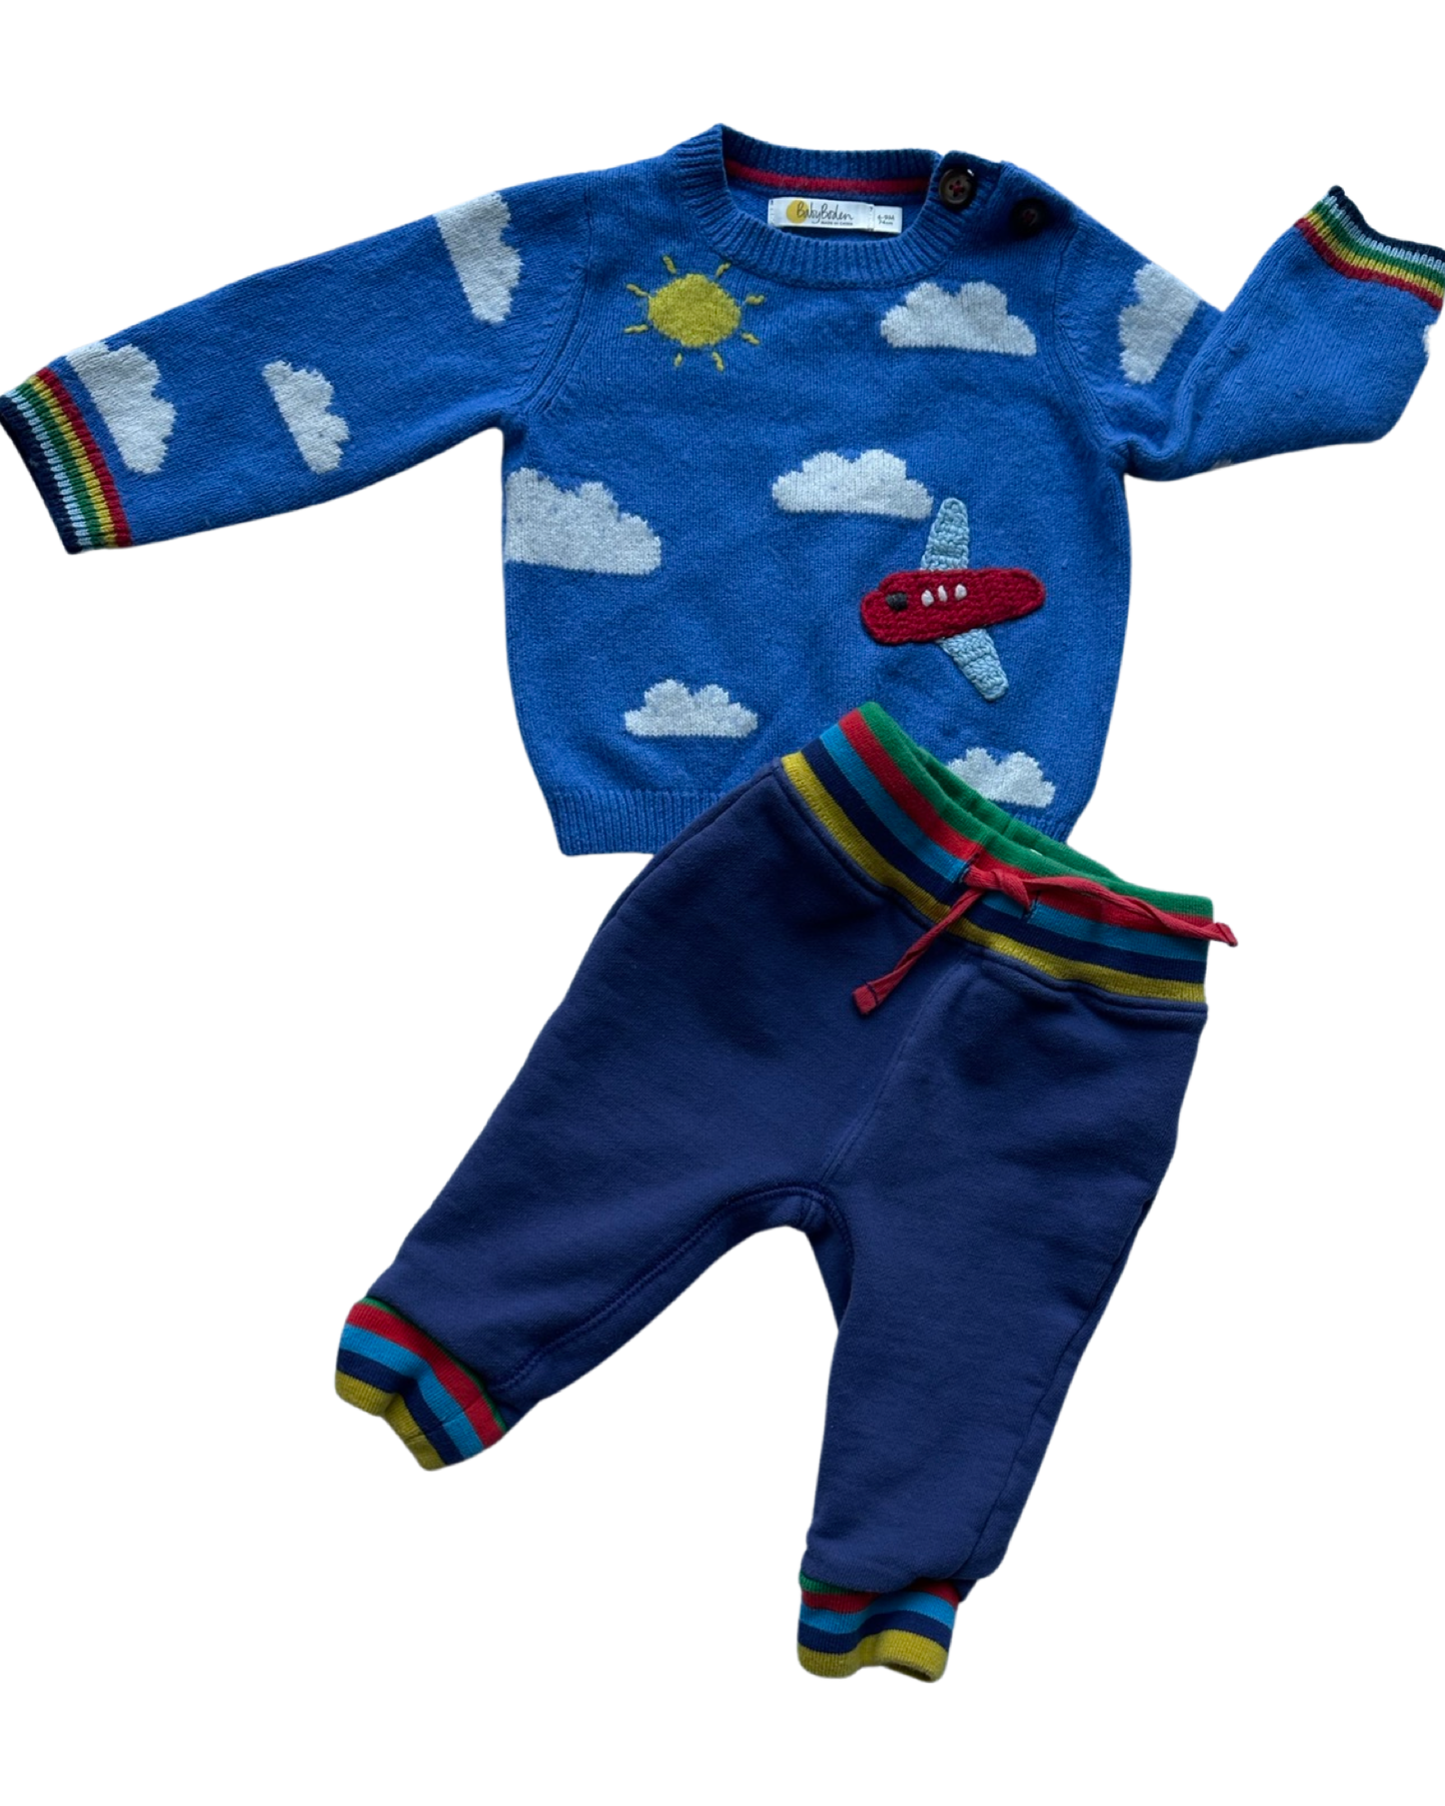 Baby Boden knitted jumper & joggers set (size 6-9mths)